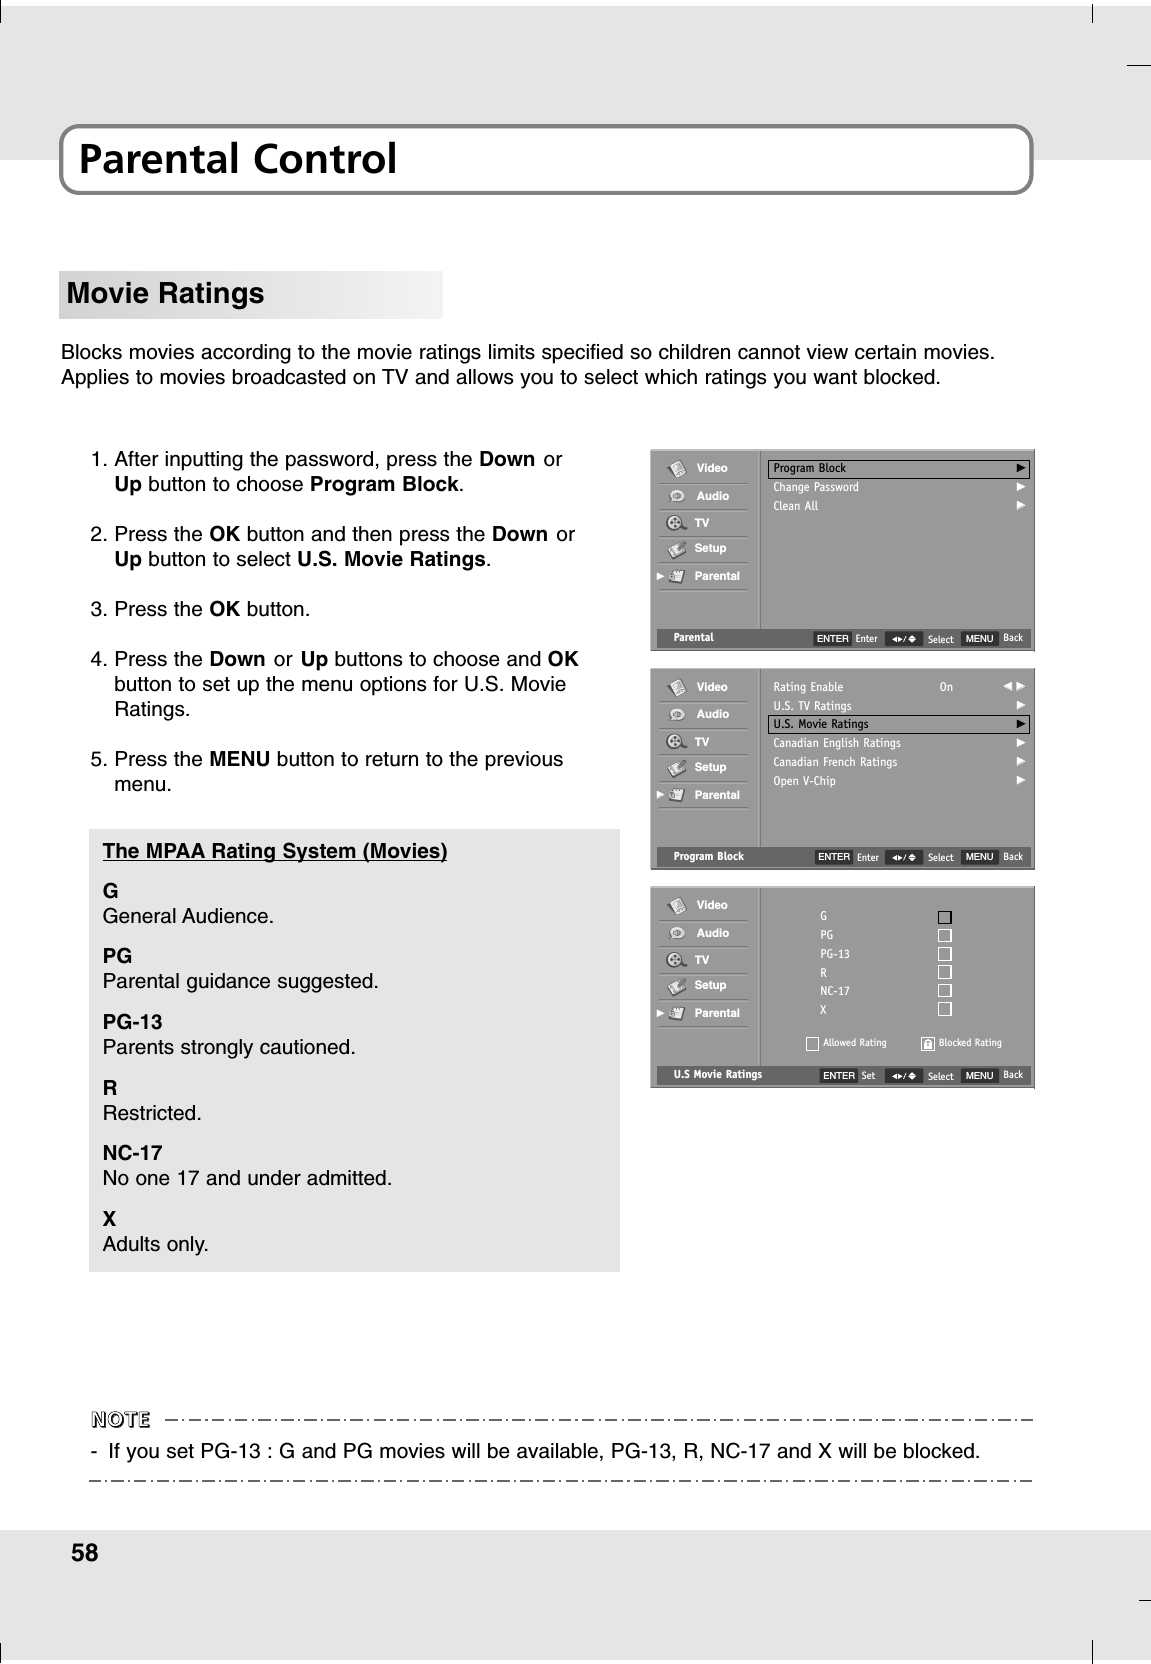 58Parental ControlMovie RatingsBlocks movies according to the movie ratings limits specified so children cannot view certain movies.Applies to movies broadcasted on TV and allows you to select which ratings you want blocked.1. After inputting the password, press the Down orUp button to choose Program Block.2. Press the OK button and then press the Down orUp button to select U.S. Movie Ratings.3. Press the OK button.4. Press the Down or Up buttons to choose and OKbutton to set up the menu options for U.S. MovieRatings.5. Press the MENU button to return to the previousmenu.U.S Movie Ratings MENU BackSelectGPGPG-13RNC-17XAllowed RatingVideoAudioTVSetupParentalGGBlocked RatingENTER SetG General Audience.PGParental guidance suggested.PG-13Parents strongly cautioned.RRestricted.NC-17No one 17 and under admitted.XAdults only.The MPAA Rating System (Movies)-If you set PG-13 : G and PG movies will be available, PG-13, R, NC-17 and X will be blocked.NNNNOOOOTTTTEEEEProgram Block MENU BackSelectRating EnableU.S. TV RatingsU.S. Movie RatingsCanadian English RatingsCanadian French RatingsOpen V-ChipOn FF  GGGGGGGGGGGGVideoAudioTVSetupParentalGGParental MENU BackSelectProgram BlockChange PasswordClean AllGGGGGGVideoAudioTVSetupParentalGGENTER EnterENTER Enter